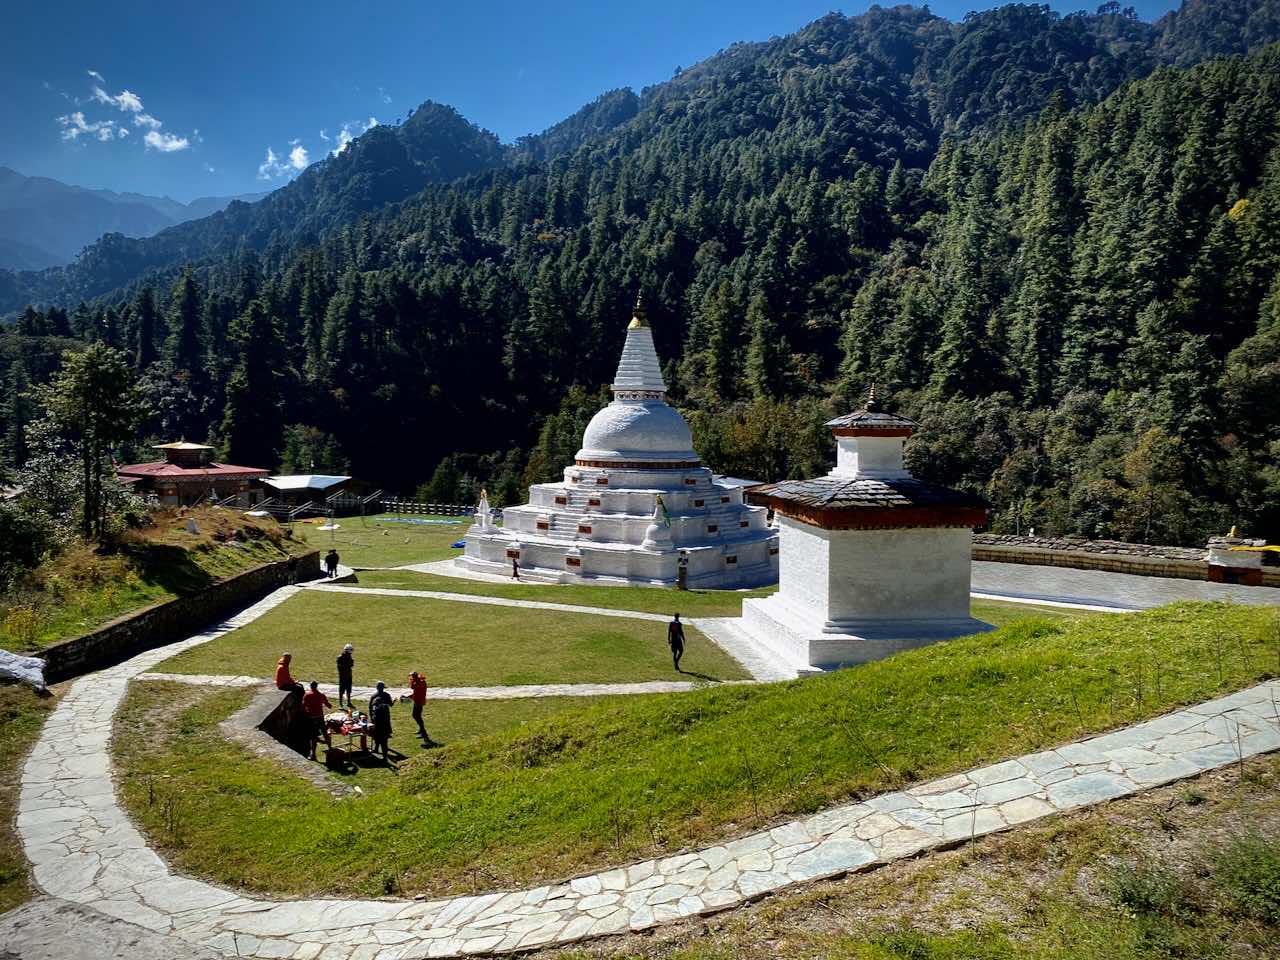 A Napalese style stupa in Bhutan